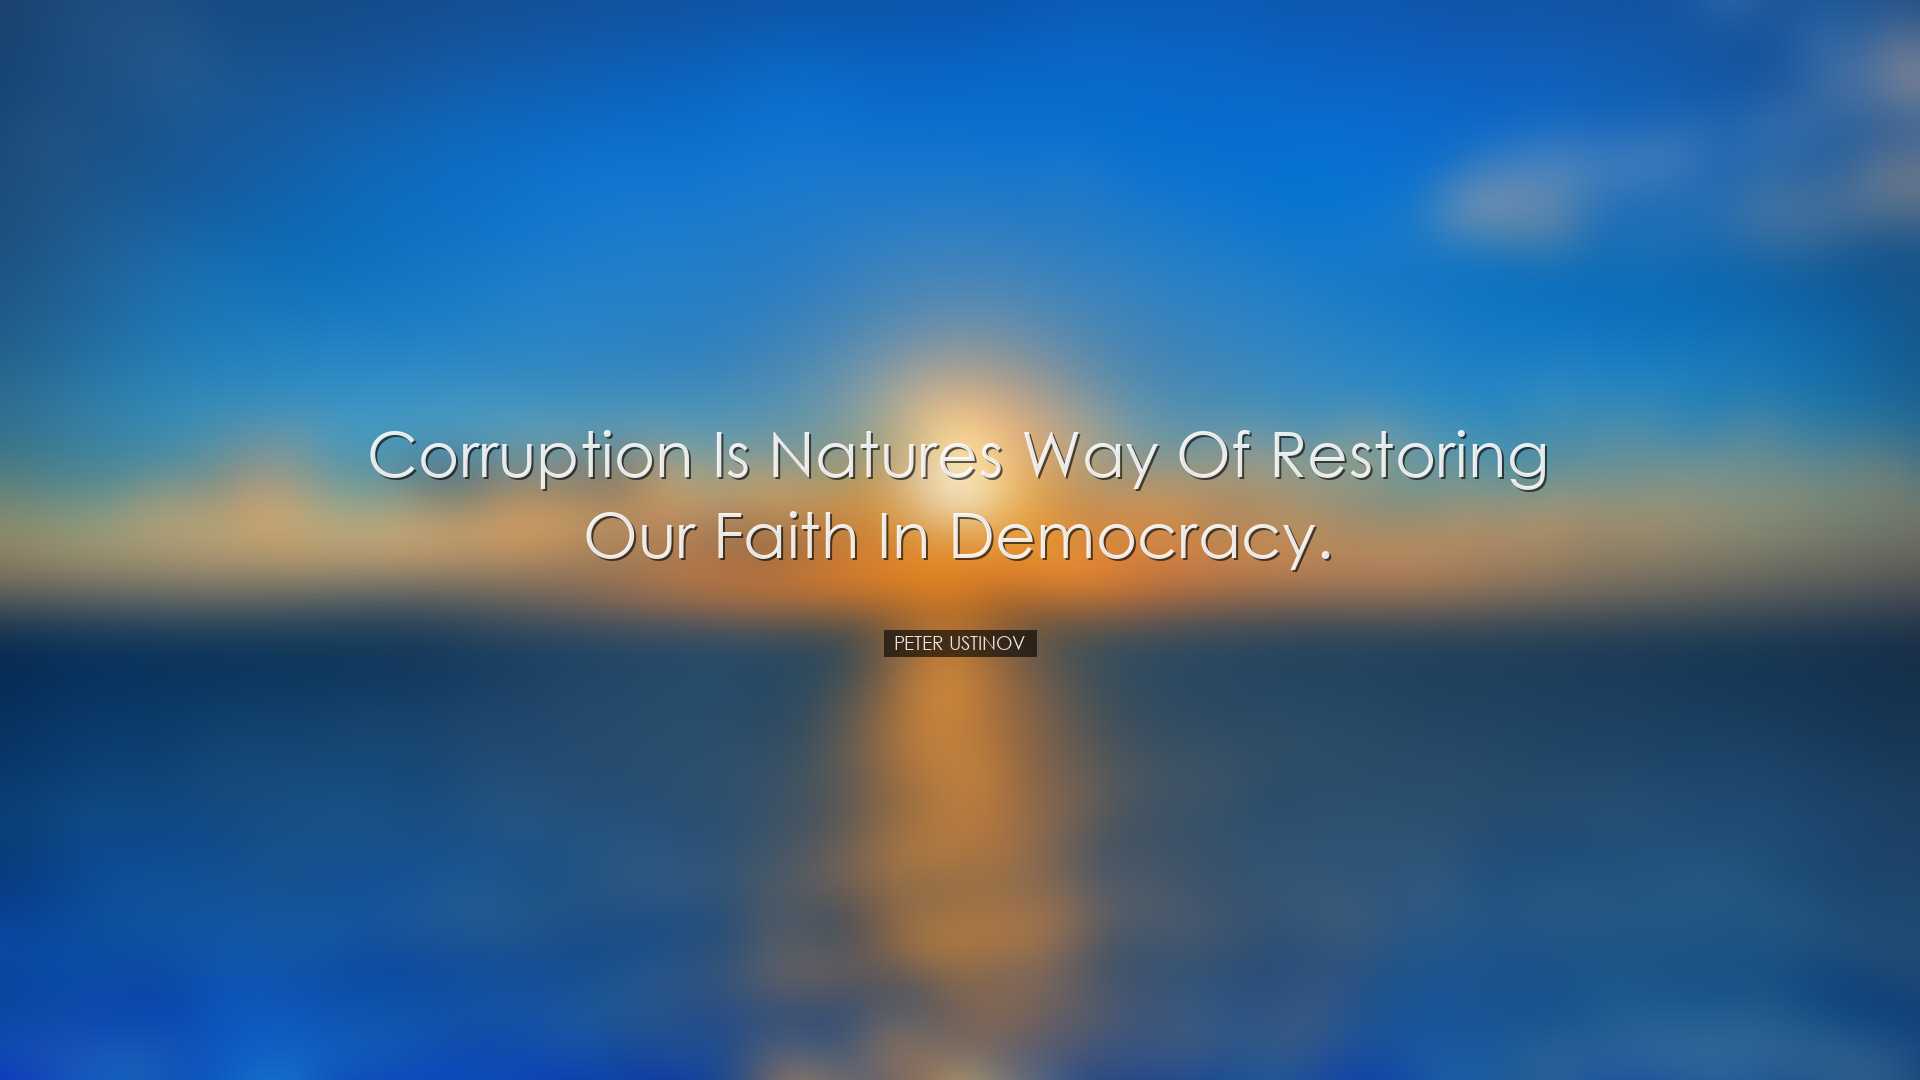 Corruption is natures way of restoring our faith in democracy. - P